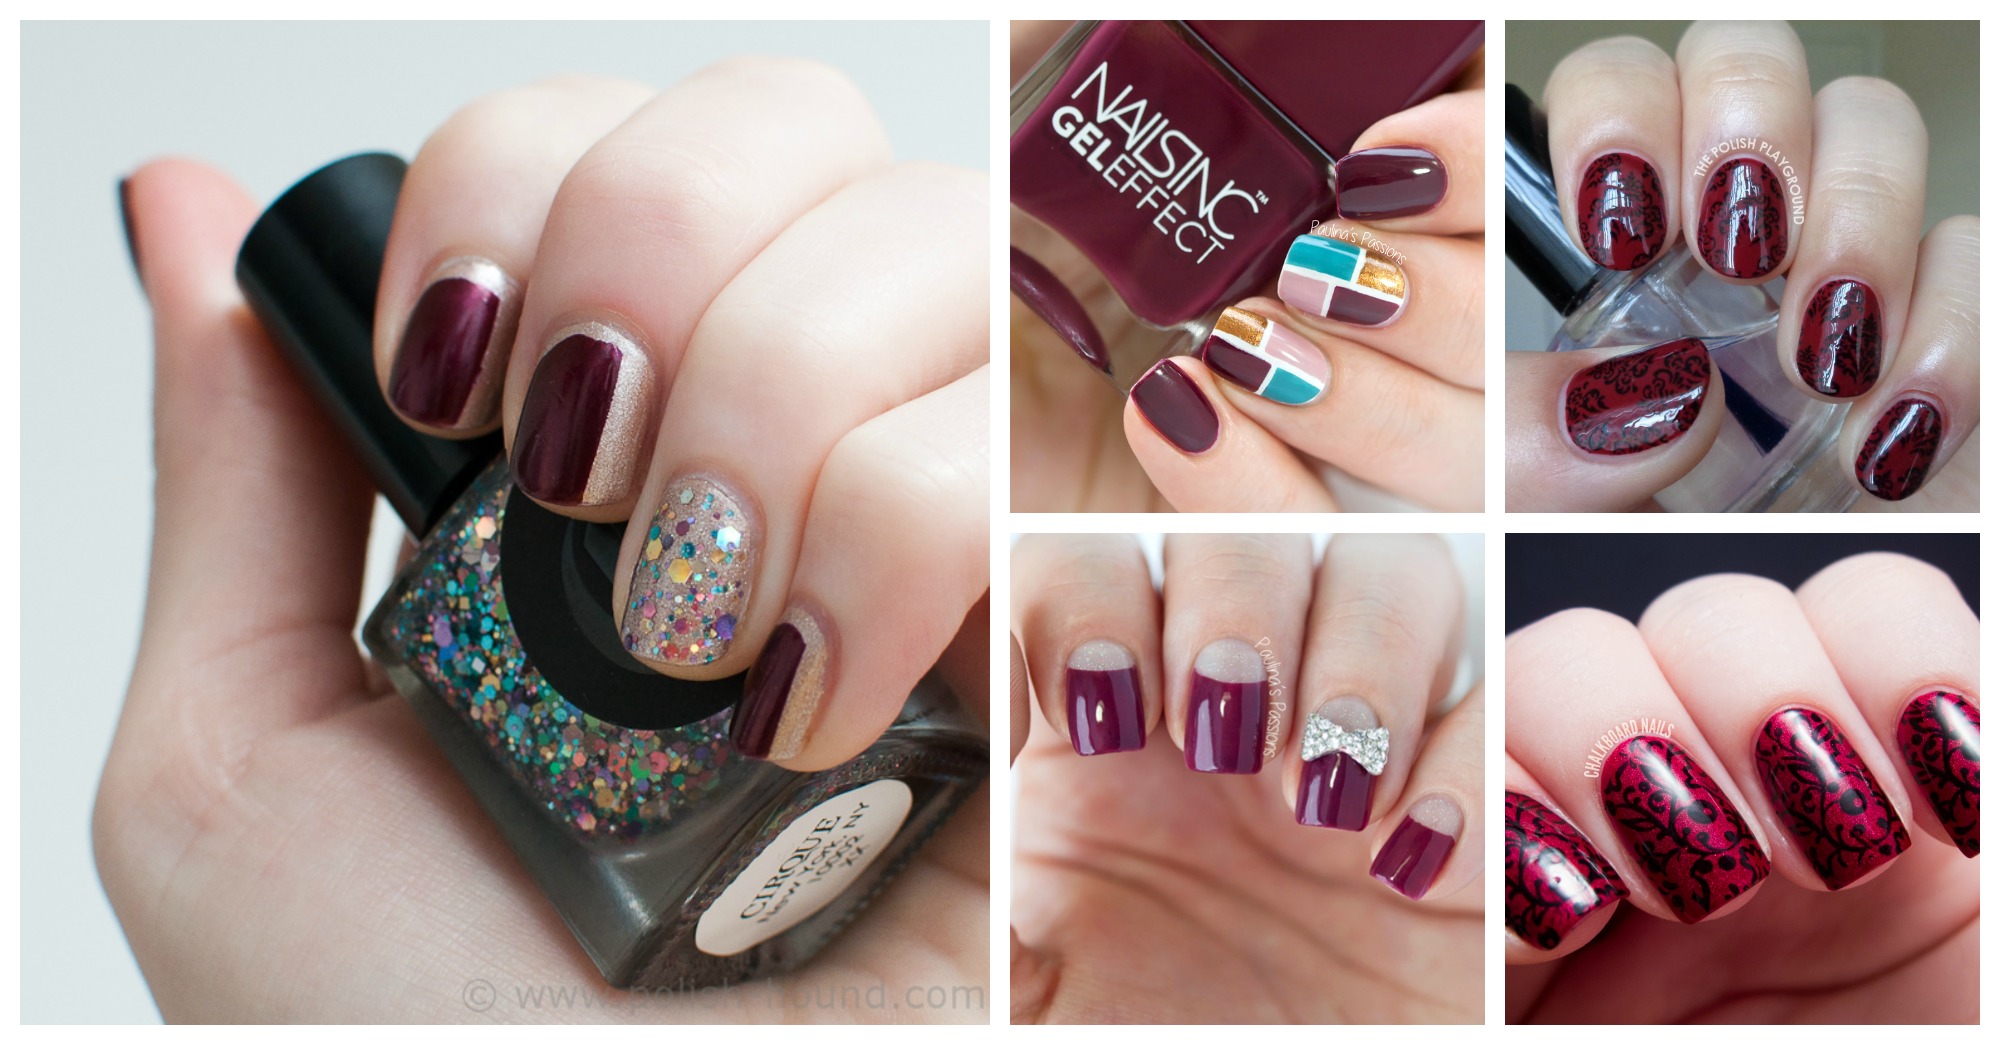 9. Burgundy and nude nail design - wide 8